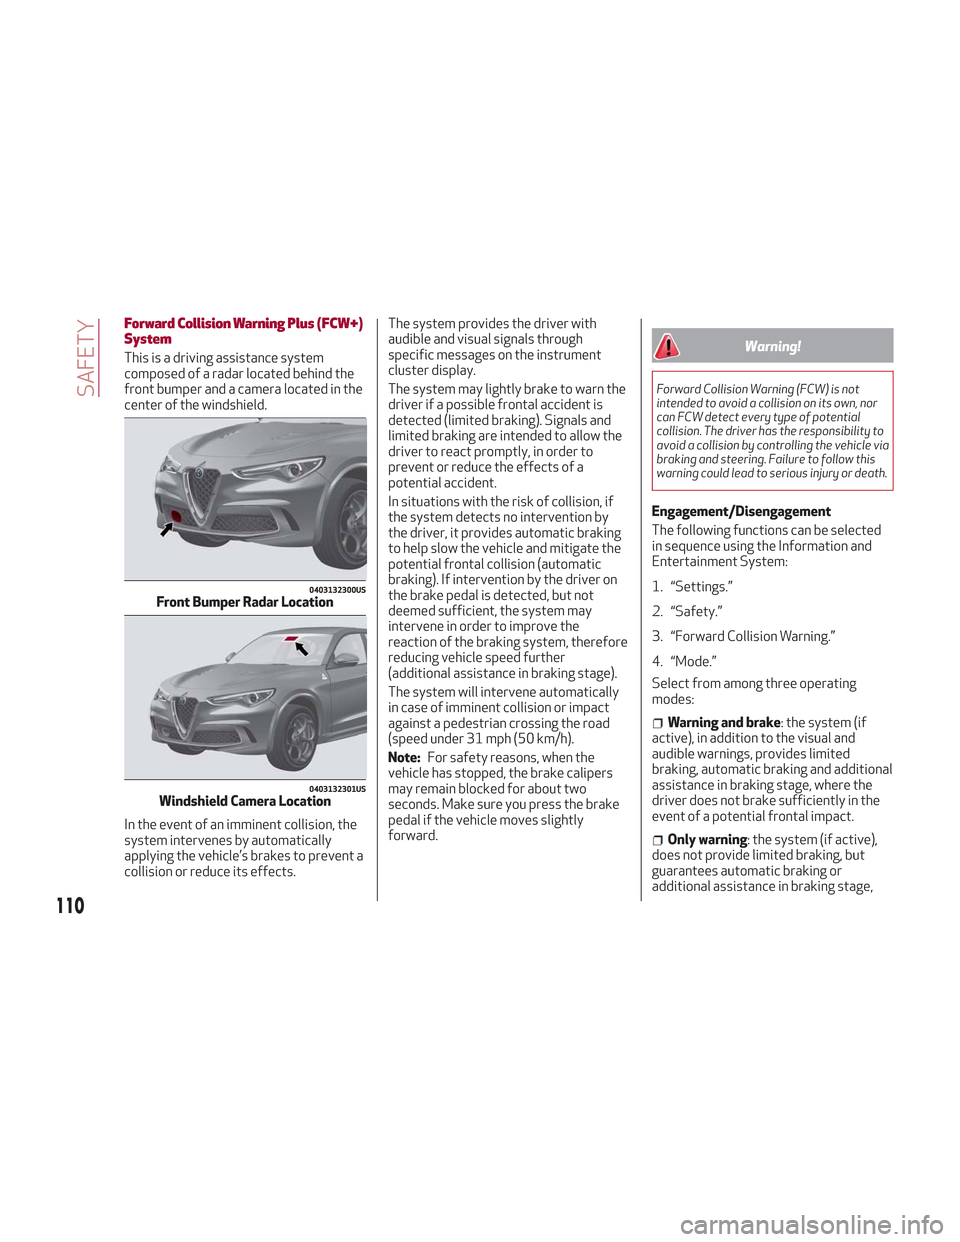 Alfa Romeo Stelvio 2018  Owners Manual Forward Collision Warning Plus (FCW+)
System
This is a driving assistance system
composed of a radar located behind the
front bumper and a camera located in the
center of the windshield.
In the event 